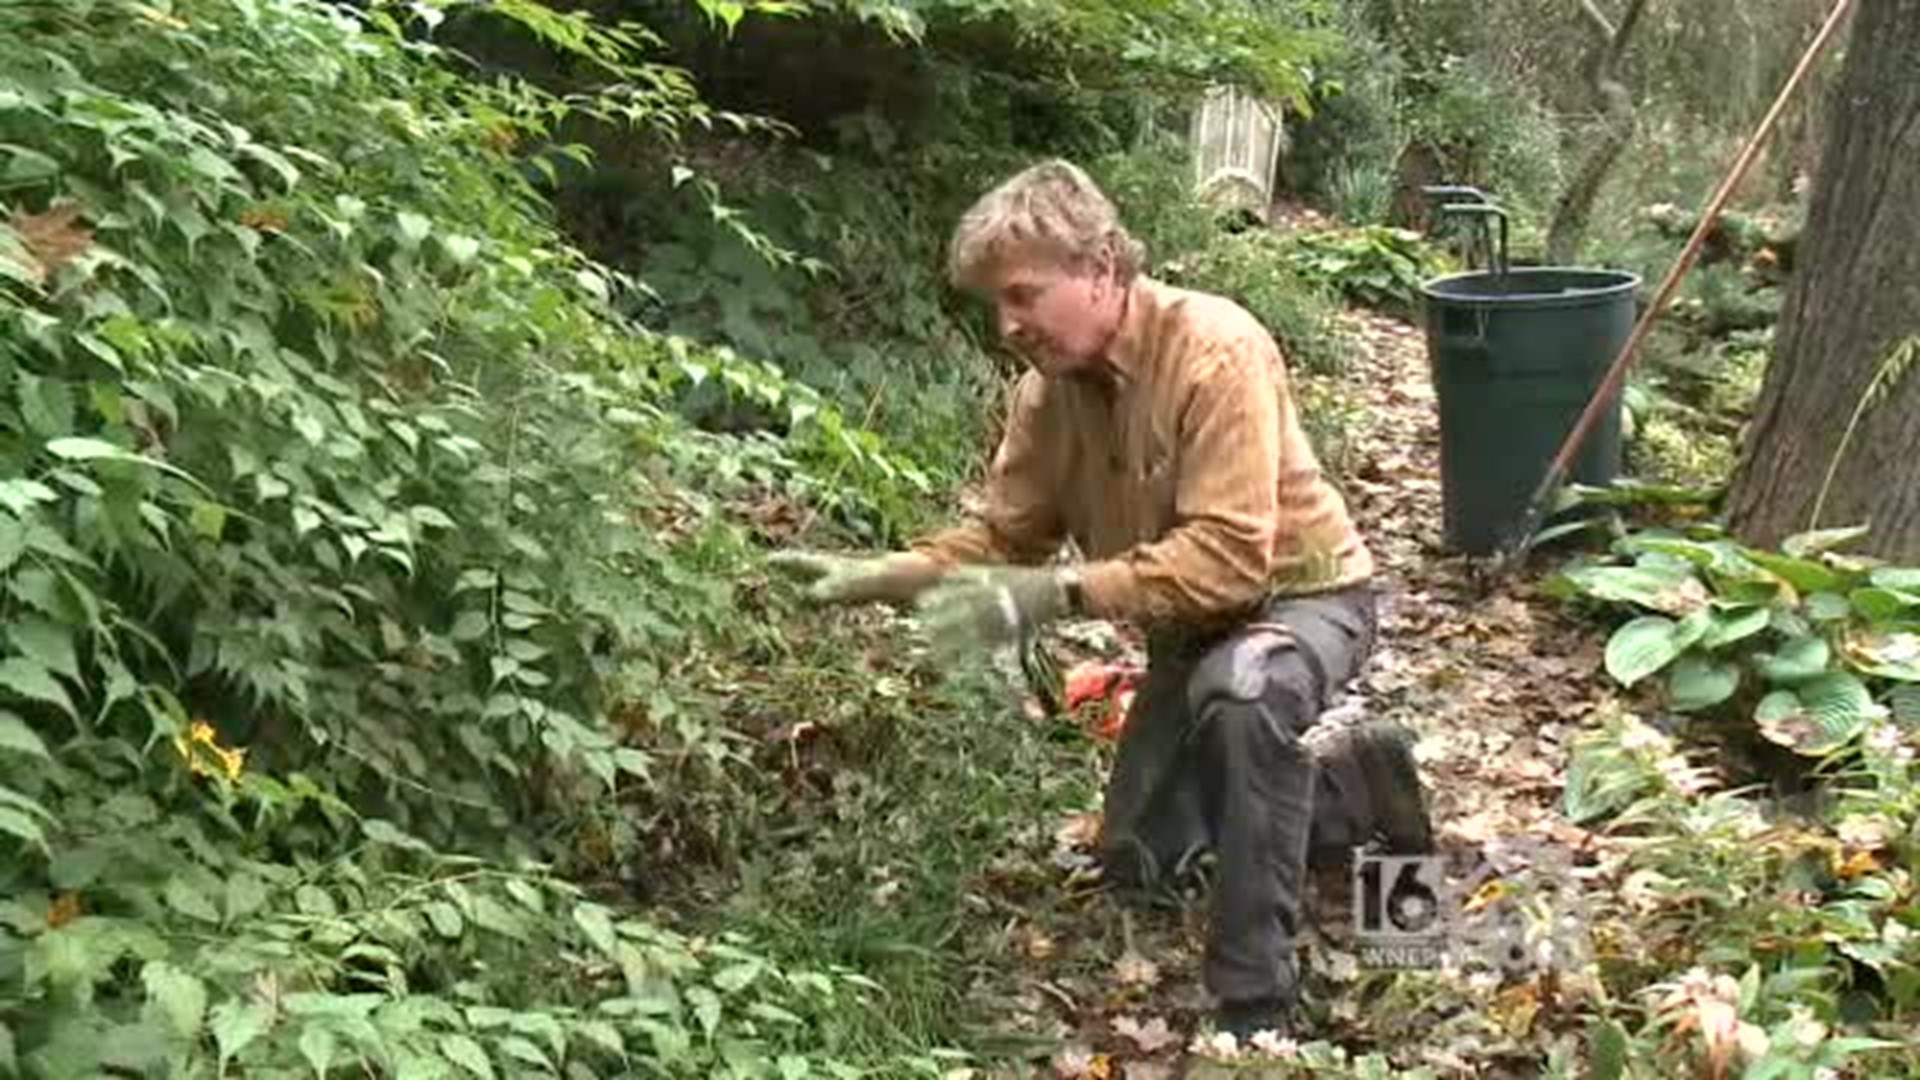 Getting your Fall garden ready for Spring